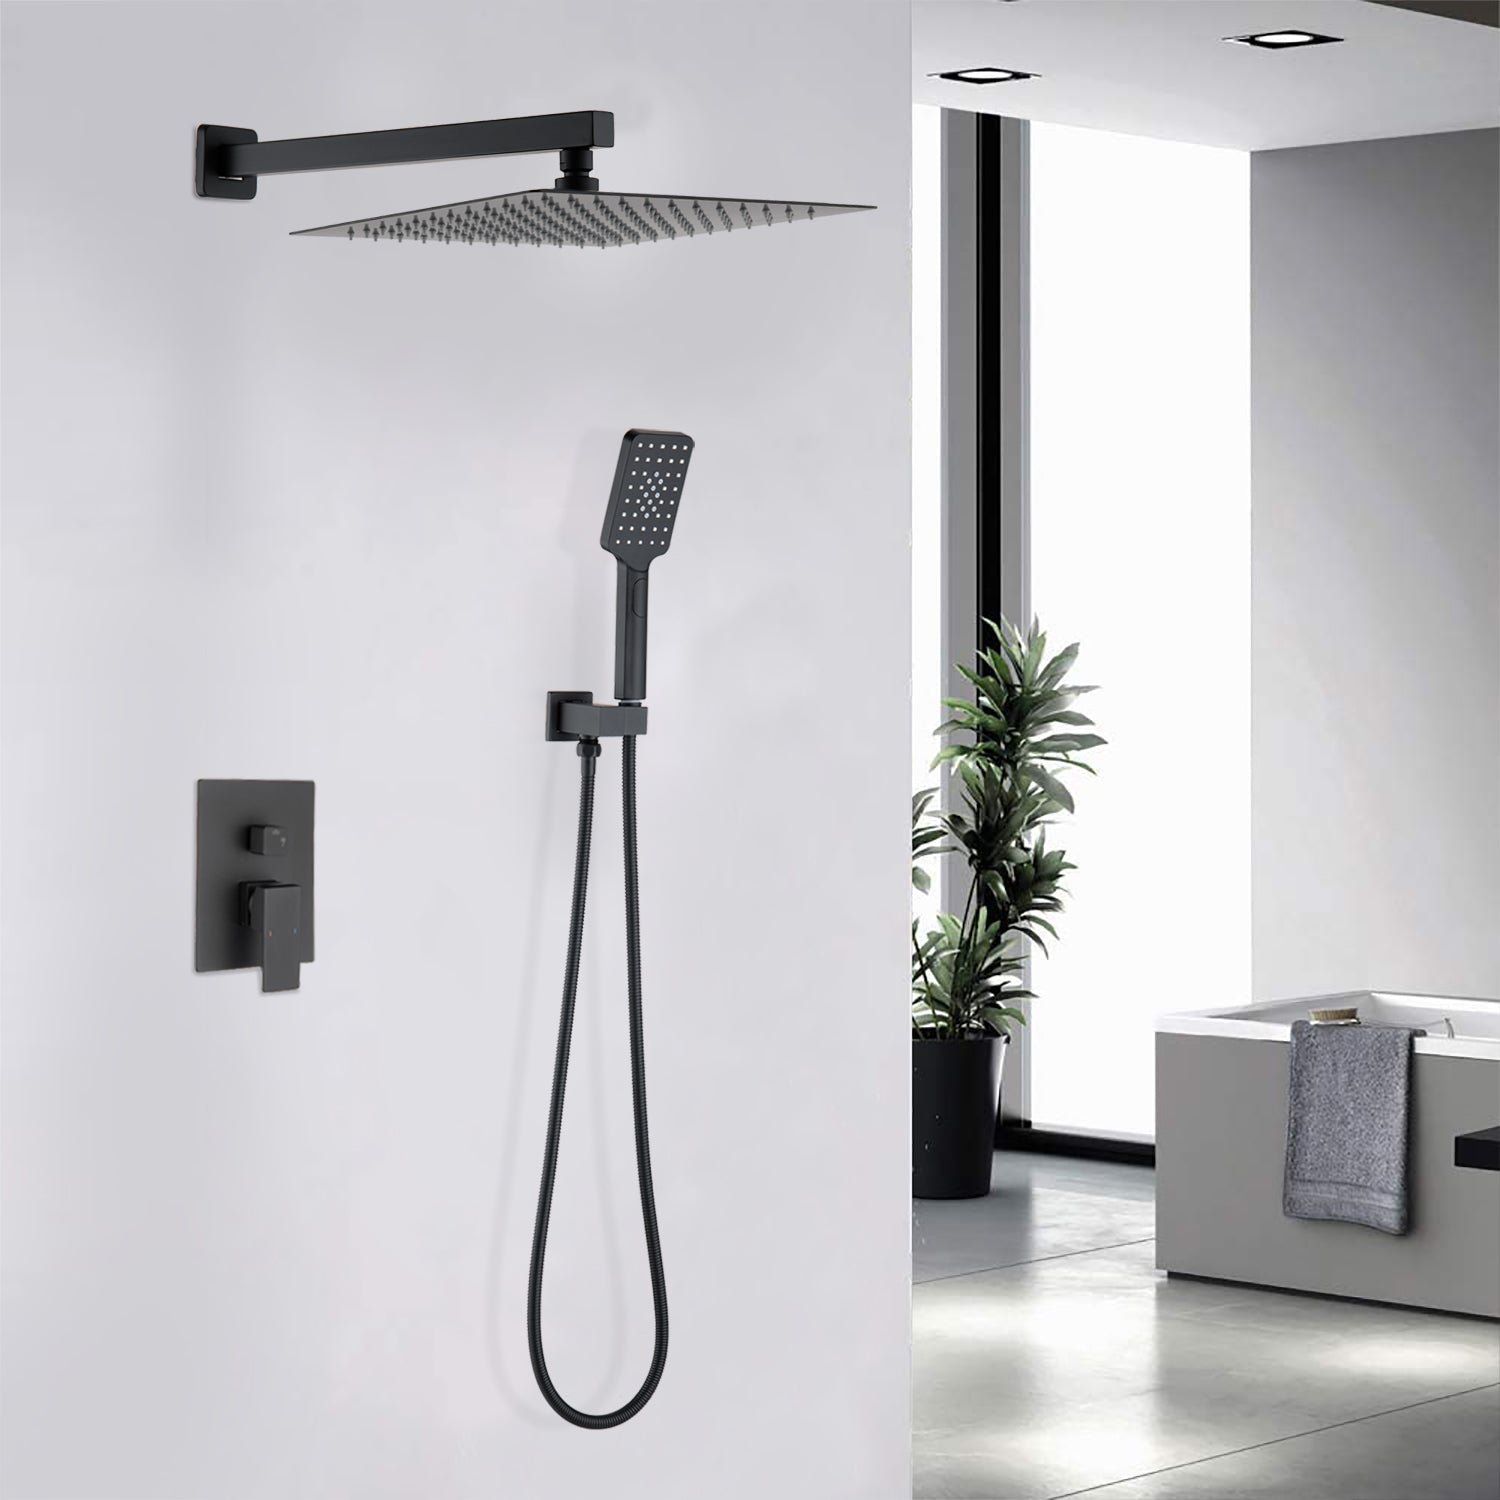 New Trends in Bathroom Design: Ceiling Mounted Shower Heads